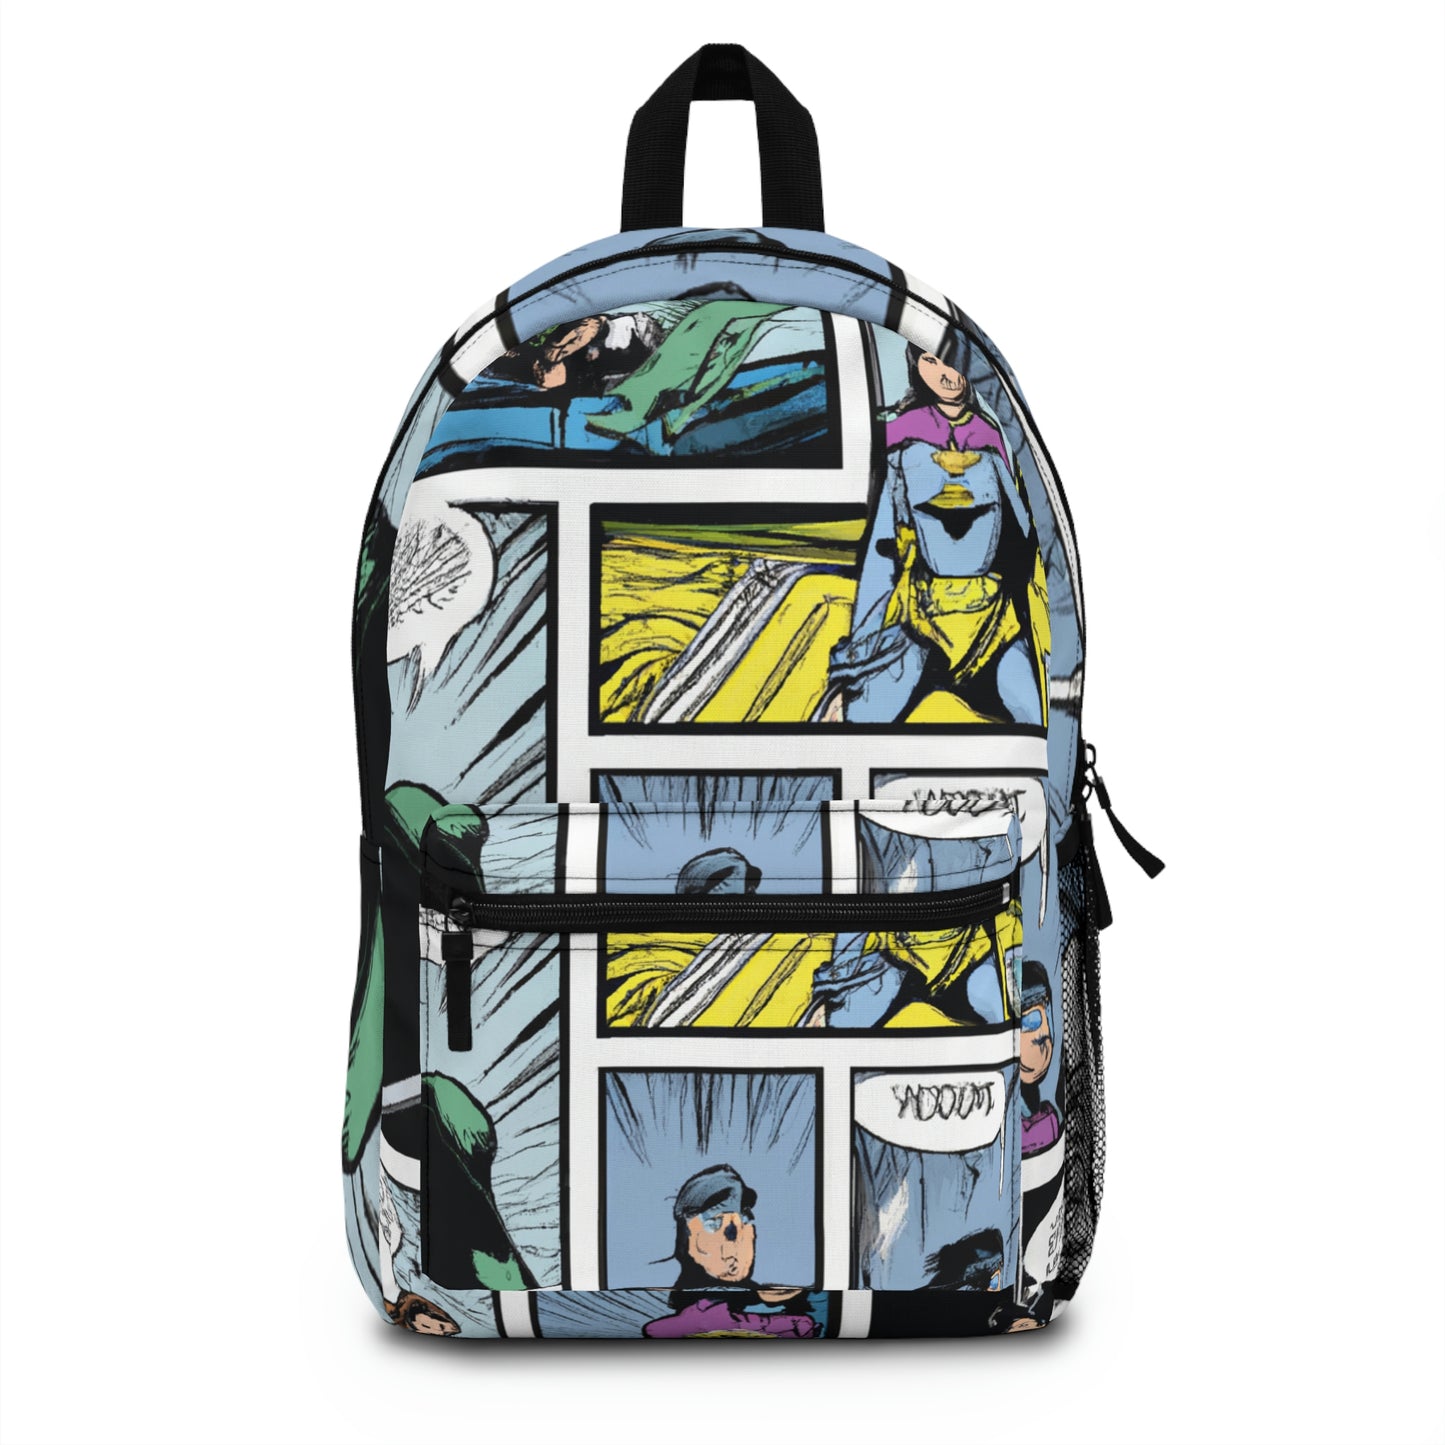 Captain Sparkslayer - Comic Book Backpack